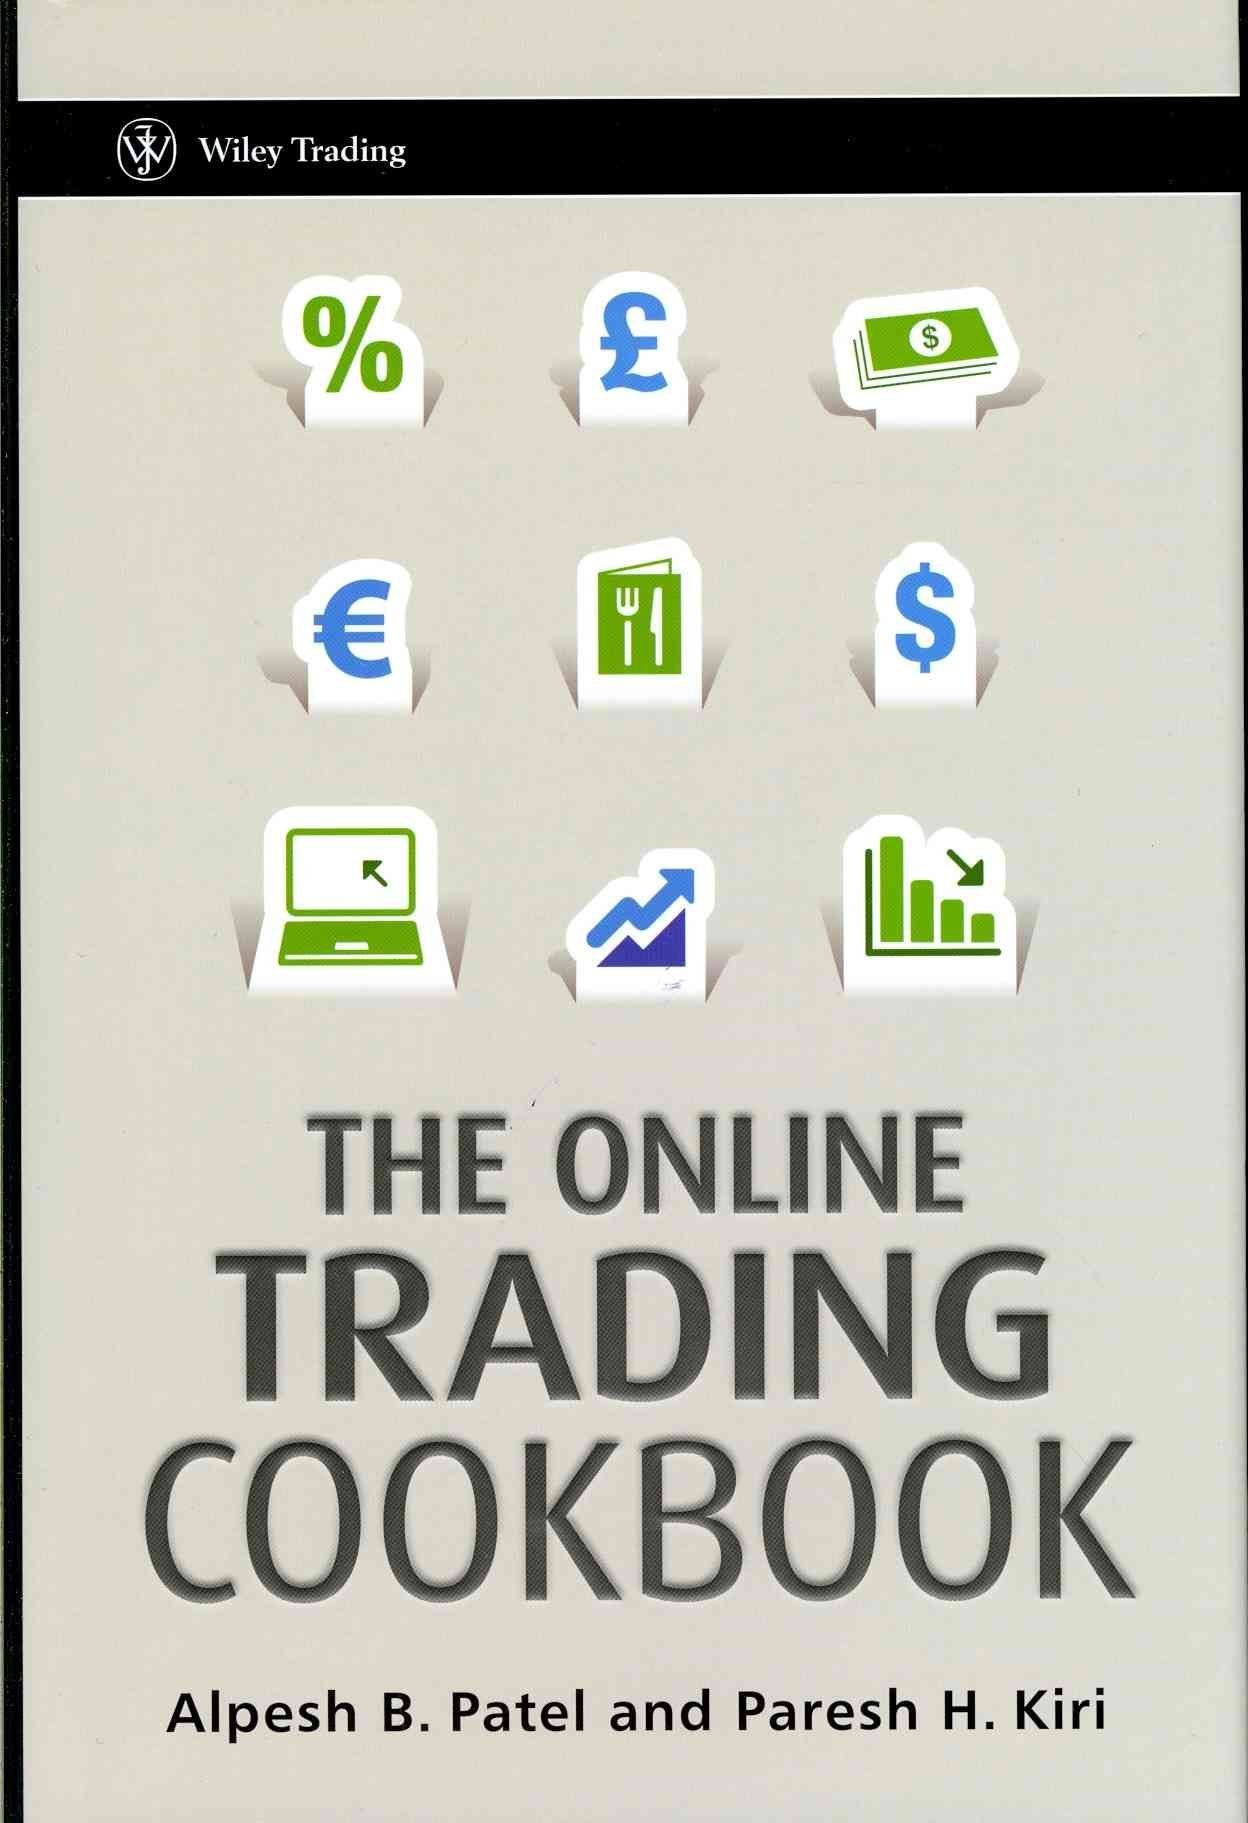 The Online Trading Cookbook